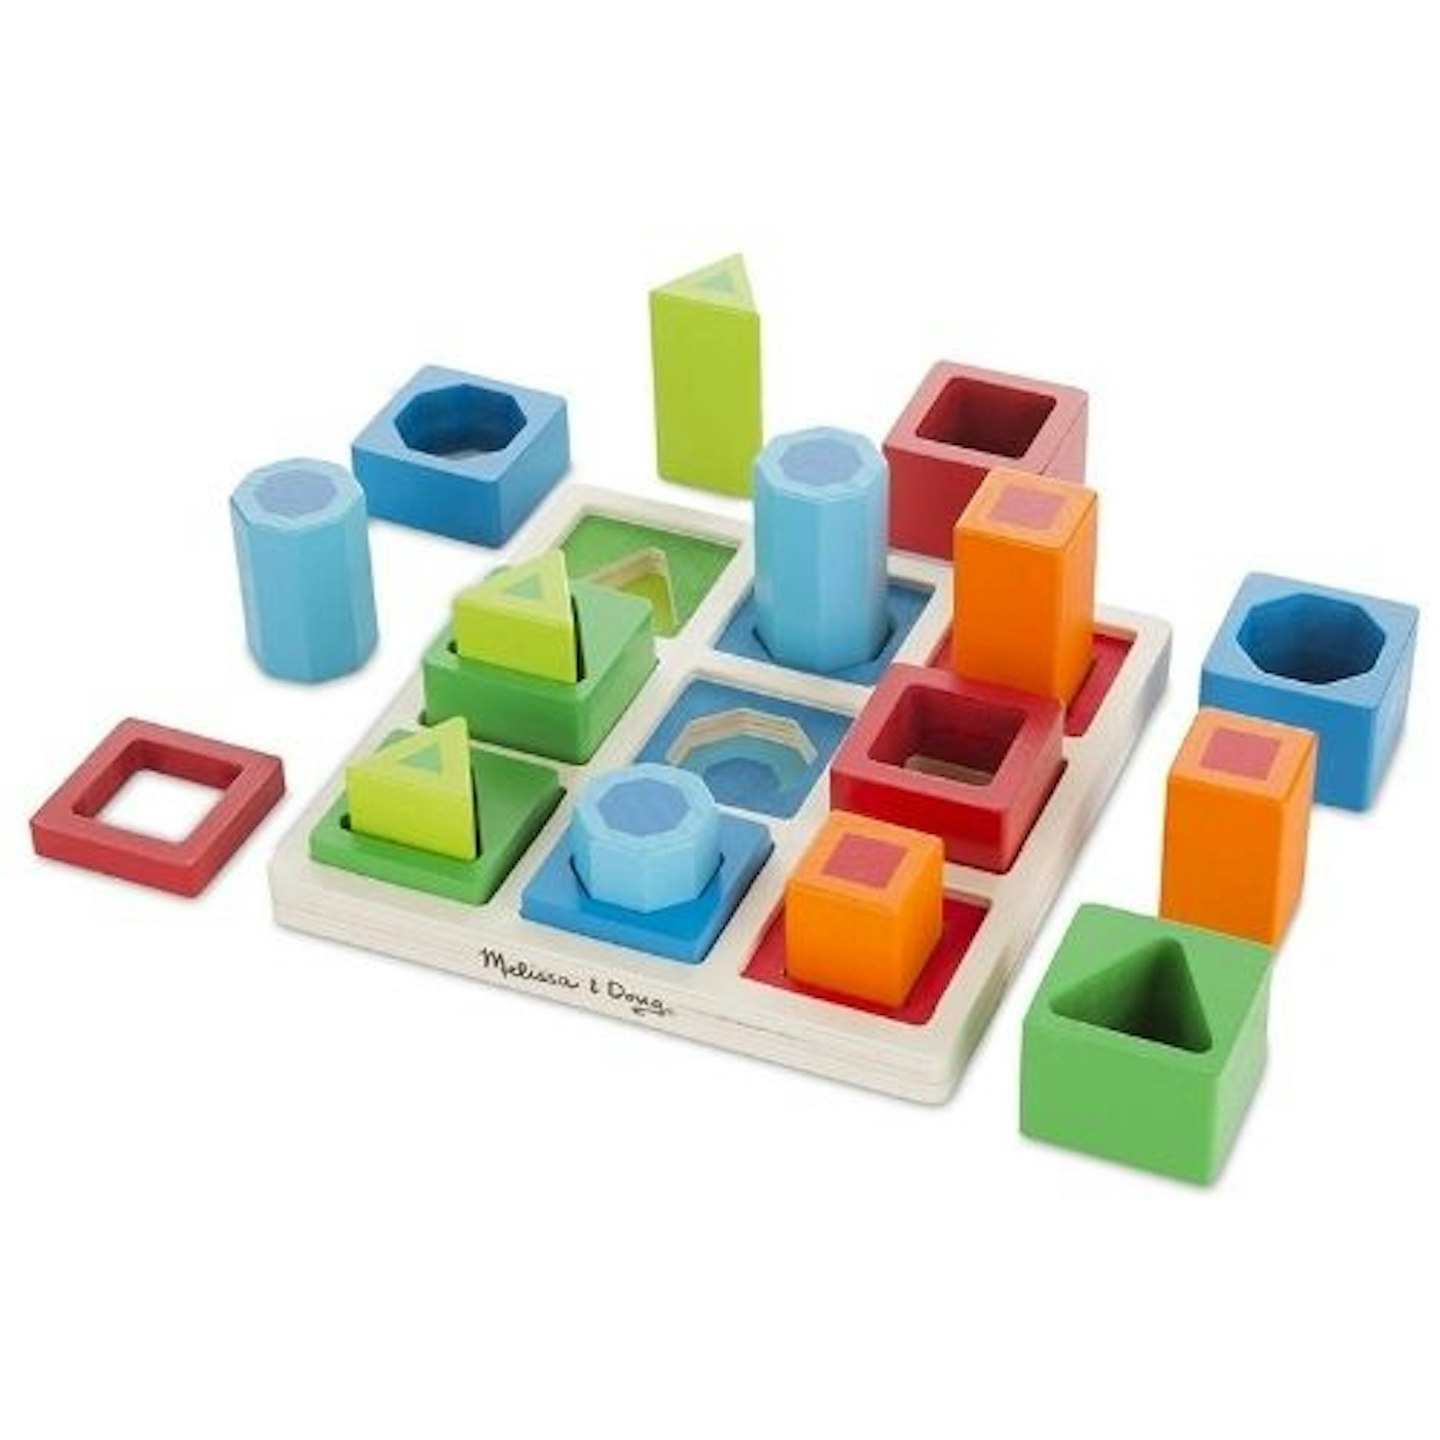  Melissa & Doug Shape Sequence Wooden Sorting Set and Educational Toy